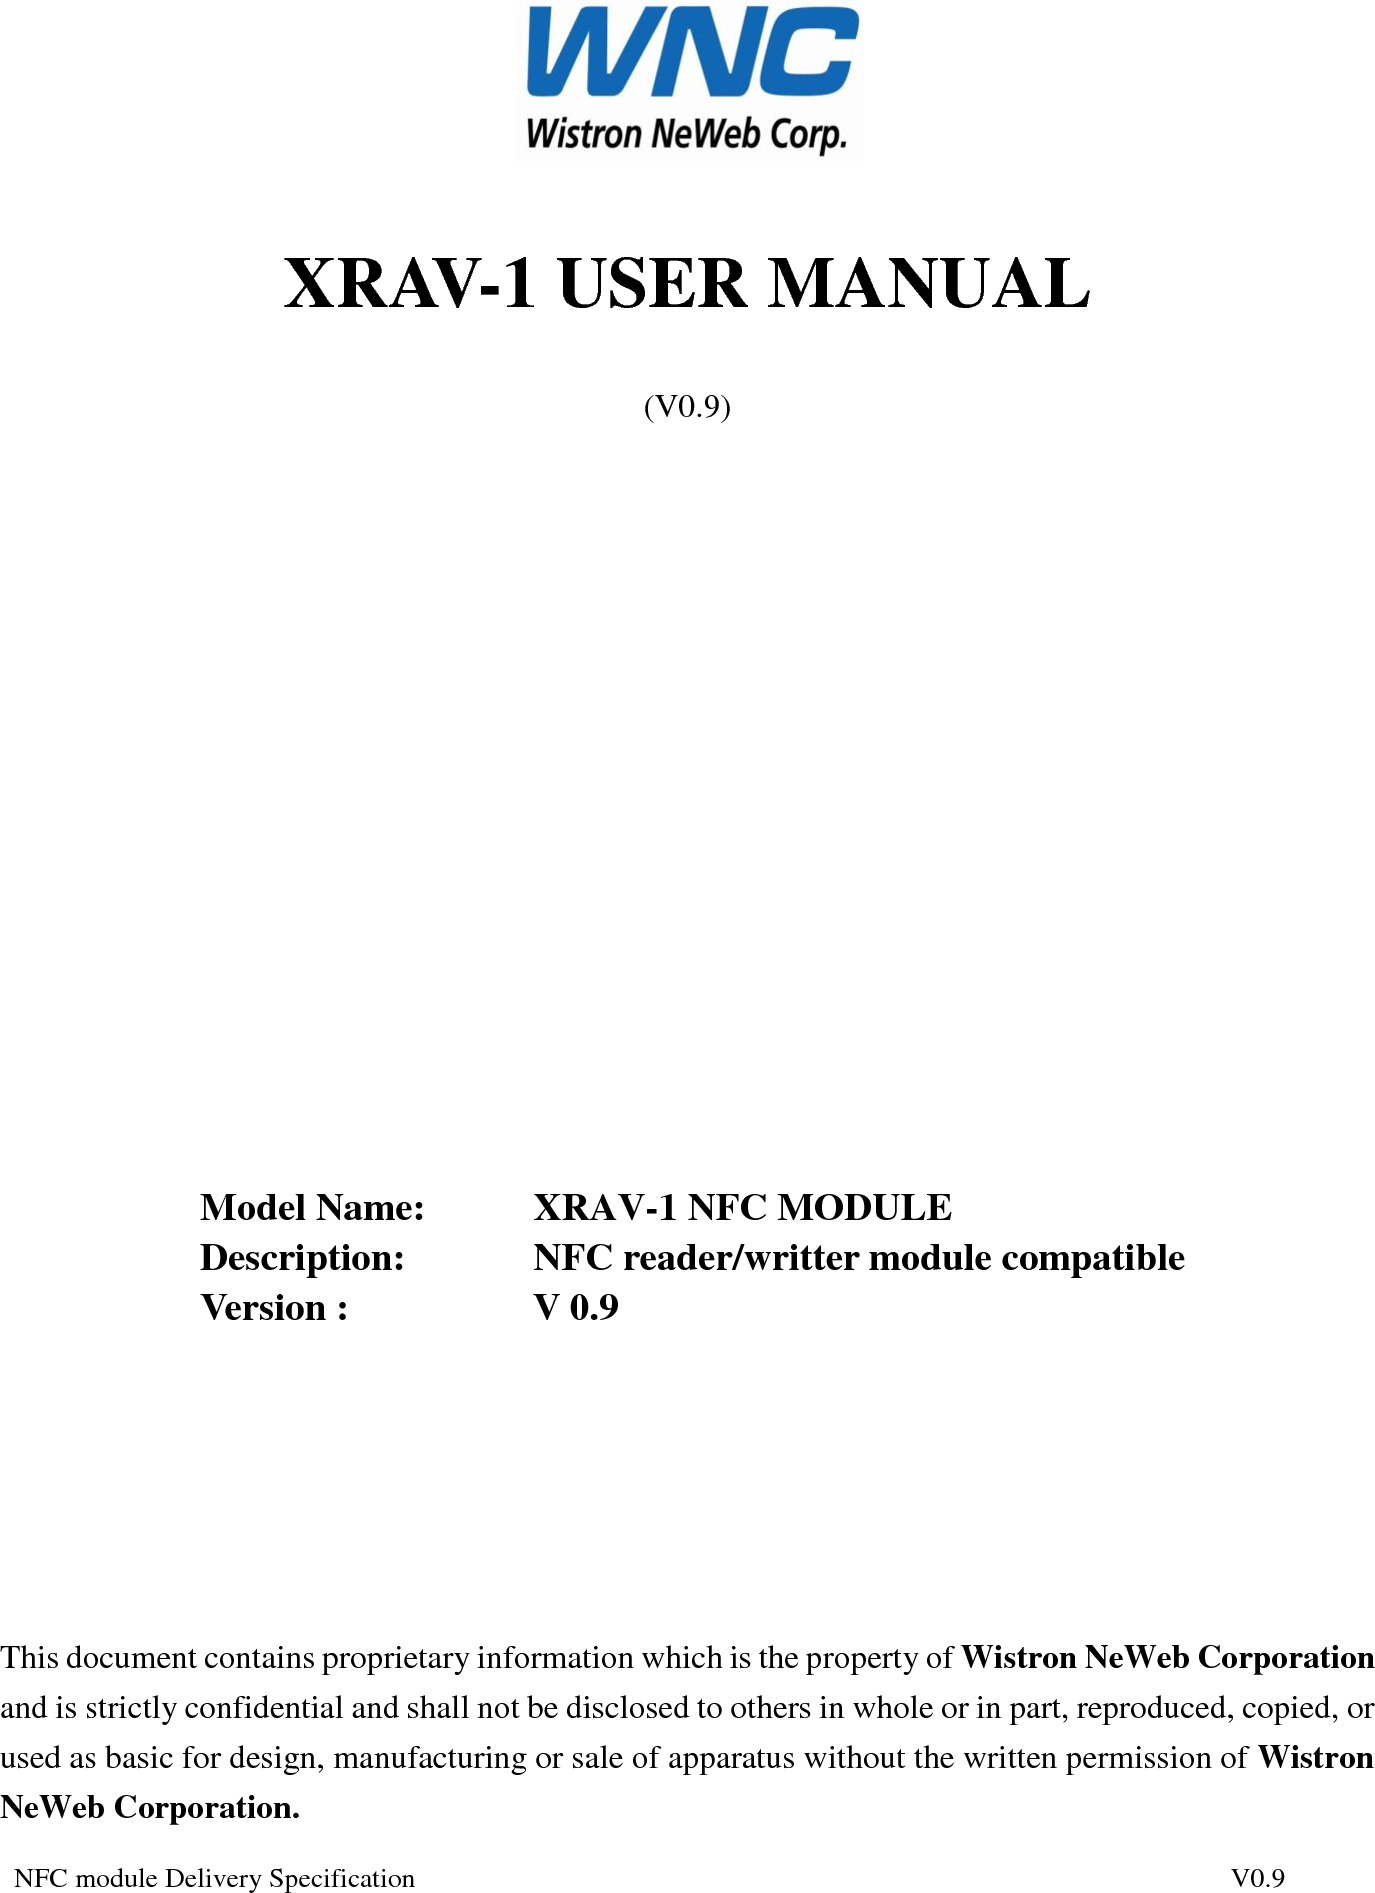 NFC module Delivery Specification          V0.9  XRAV-1 USER MANUAL (V0.9)                Model Name:     XRAV-1 NFC MODULE Description:     NFC reader/writter module compatible Version :                   V 0.9       This document contains proprietary information which is the property of Wistron NeWeb Corporation and is strictly confidential and shall not be disclosed to others in whole or in part, reproduced, copied, or used as basic for design, manufacturing or sale of apparatus without the written permission of Wistron NeWeb Corporation.